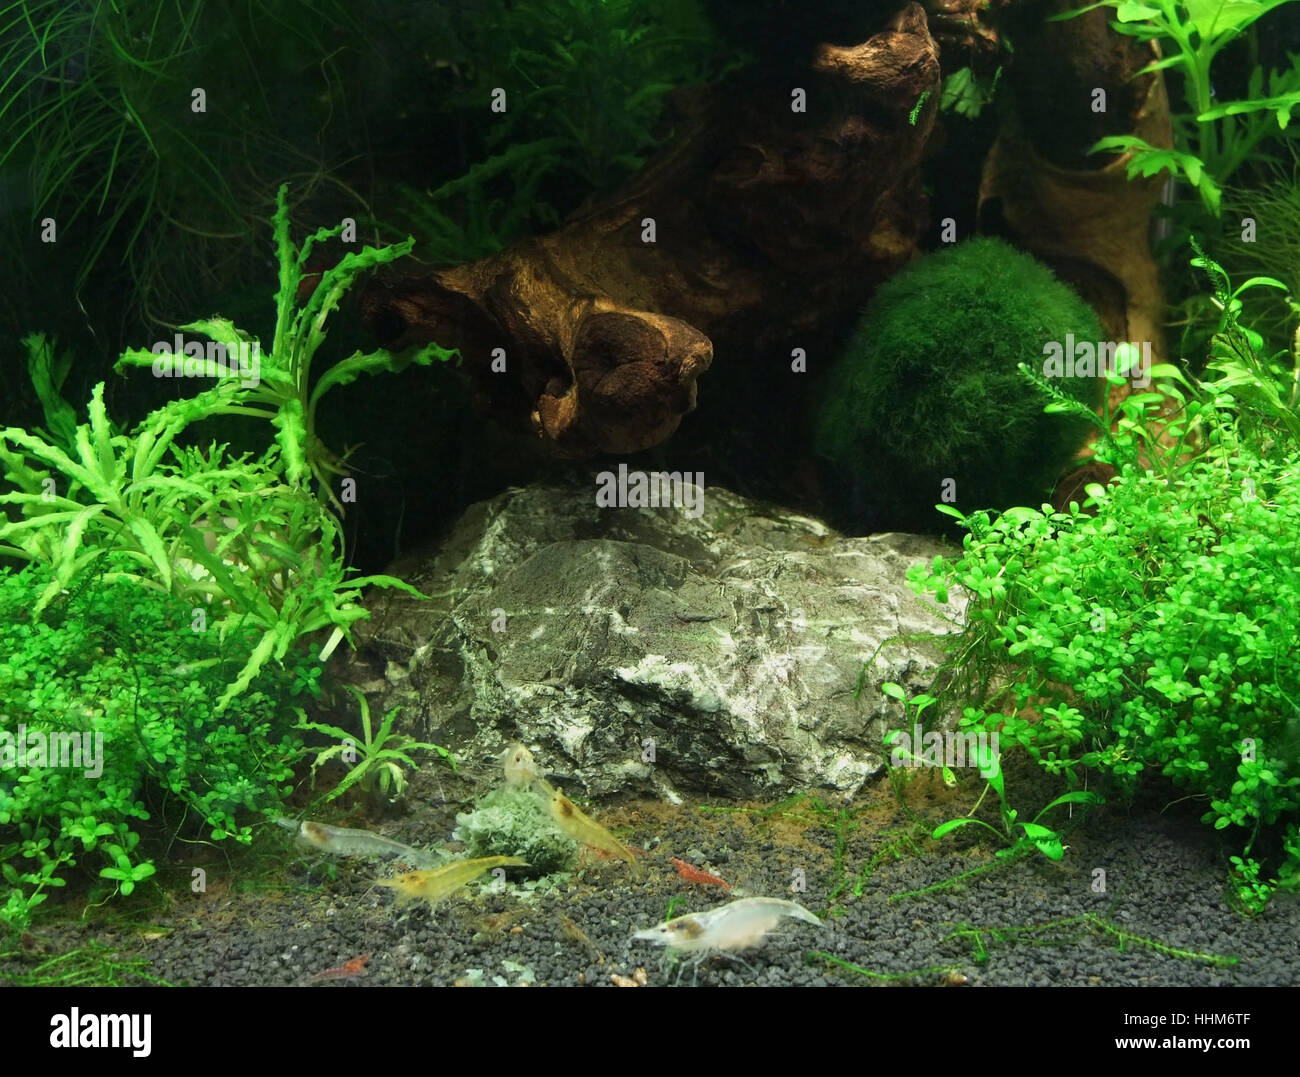 underwater scenery including some fresh water shrimps Stock Photo